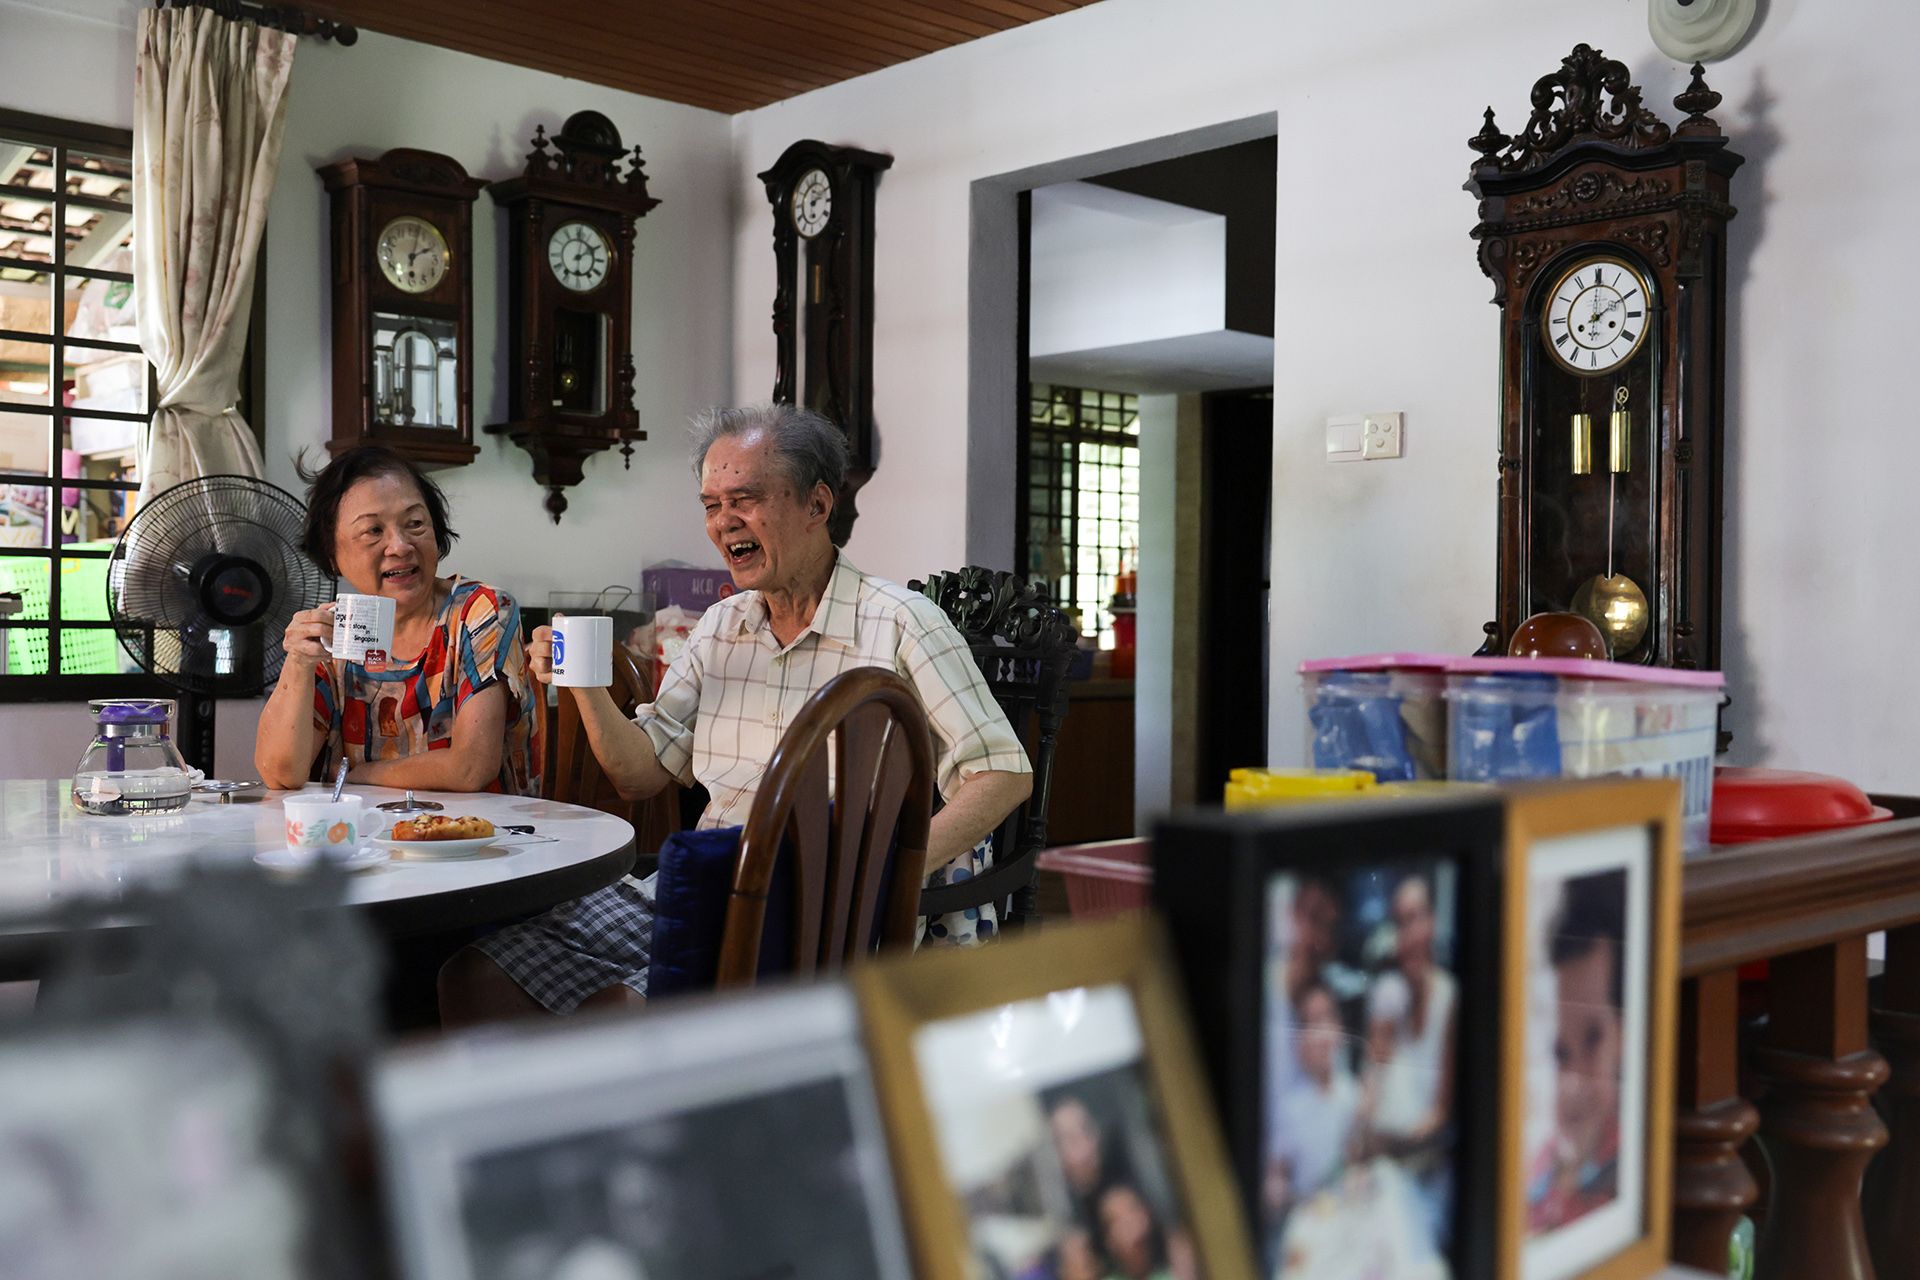 Mr Mun and his wife Tan Ling Cheng sharing a light-hearted moment during tea break in the dining room that is decorated with antique clocks, on April 7, 2024.